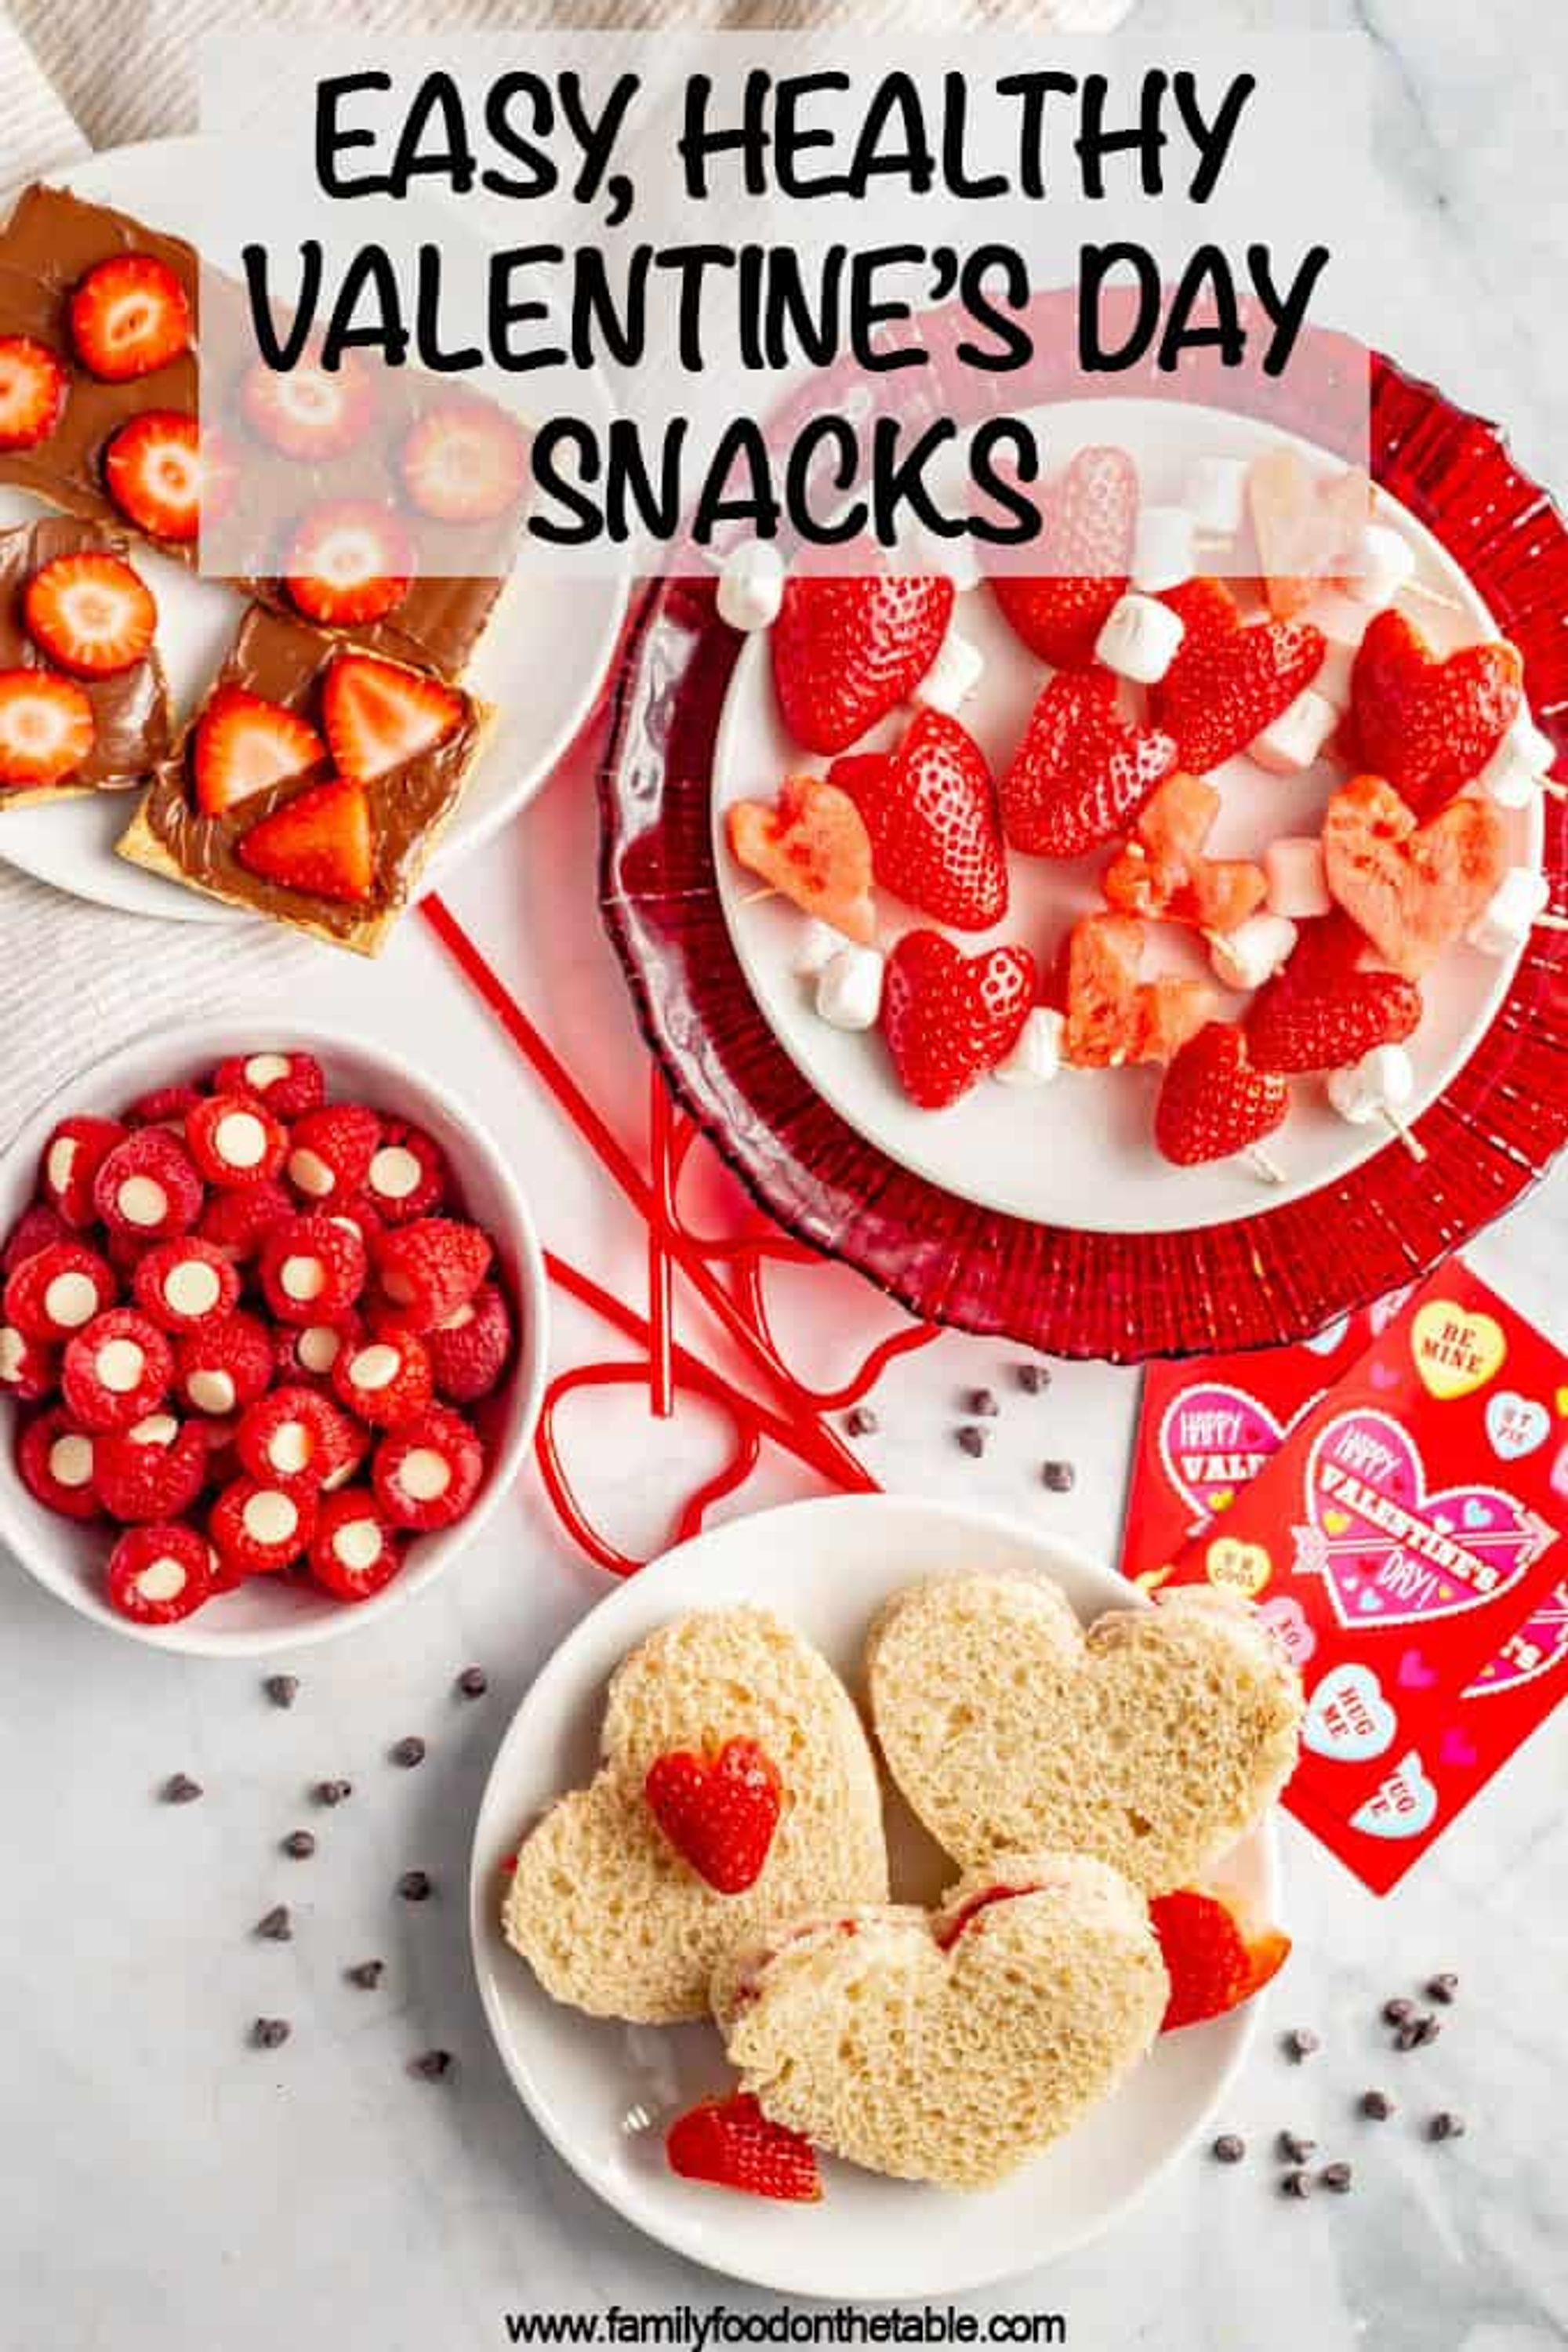 Healthy Valentine's Day Snacks 33 ideas Family Food on the Table